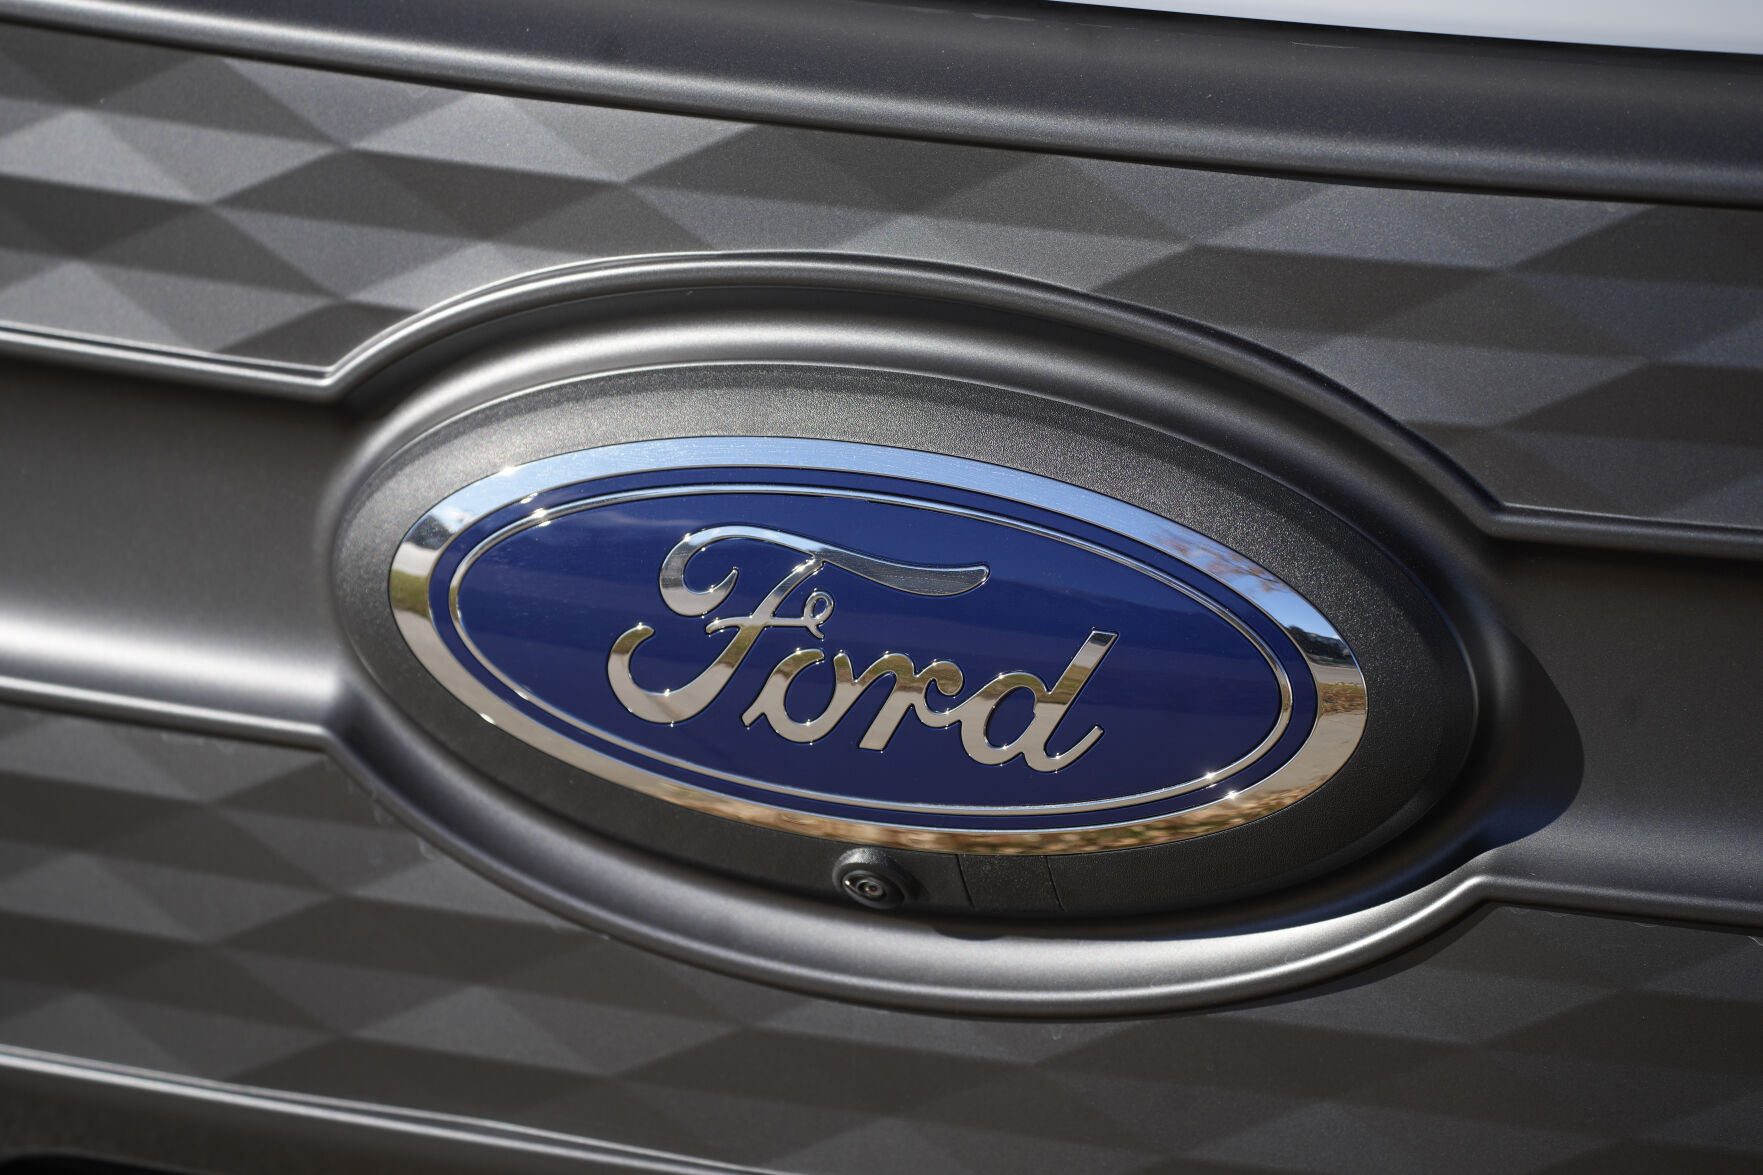 <p>FILE - The Ford company logo is shown on Thursday, Nov. 25, 2022, outside a Ford dealership in southeast Denver. Ford is recalling more than 238,000 Explorers in the U.S. because a rear axle bolt can fail, potentially causing a loss of drive power or allowing the SUVs to roll away while in park. The recall on Friday, Oct. 13, 2023, comes after U.S. safety regulators opened an investigation into the problem after getting two complaints that repairs didn’t work in two previous recalls this year and in 2022. (AP Photo/David Zalubowski, File)</p>   PHOTO CREDIT: David Zalubowski - staff, ASSOCIATED PRESS